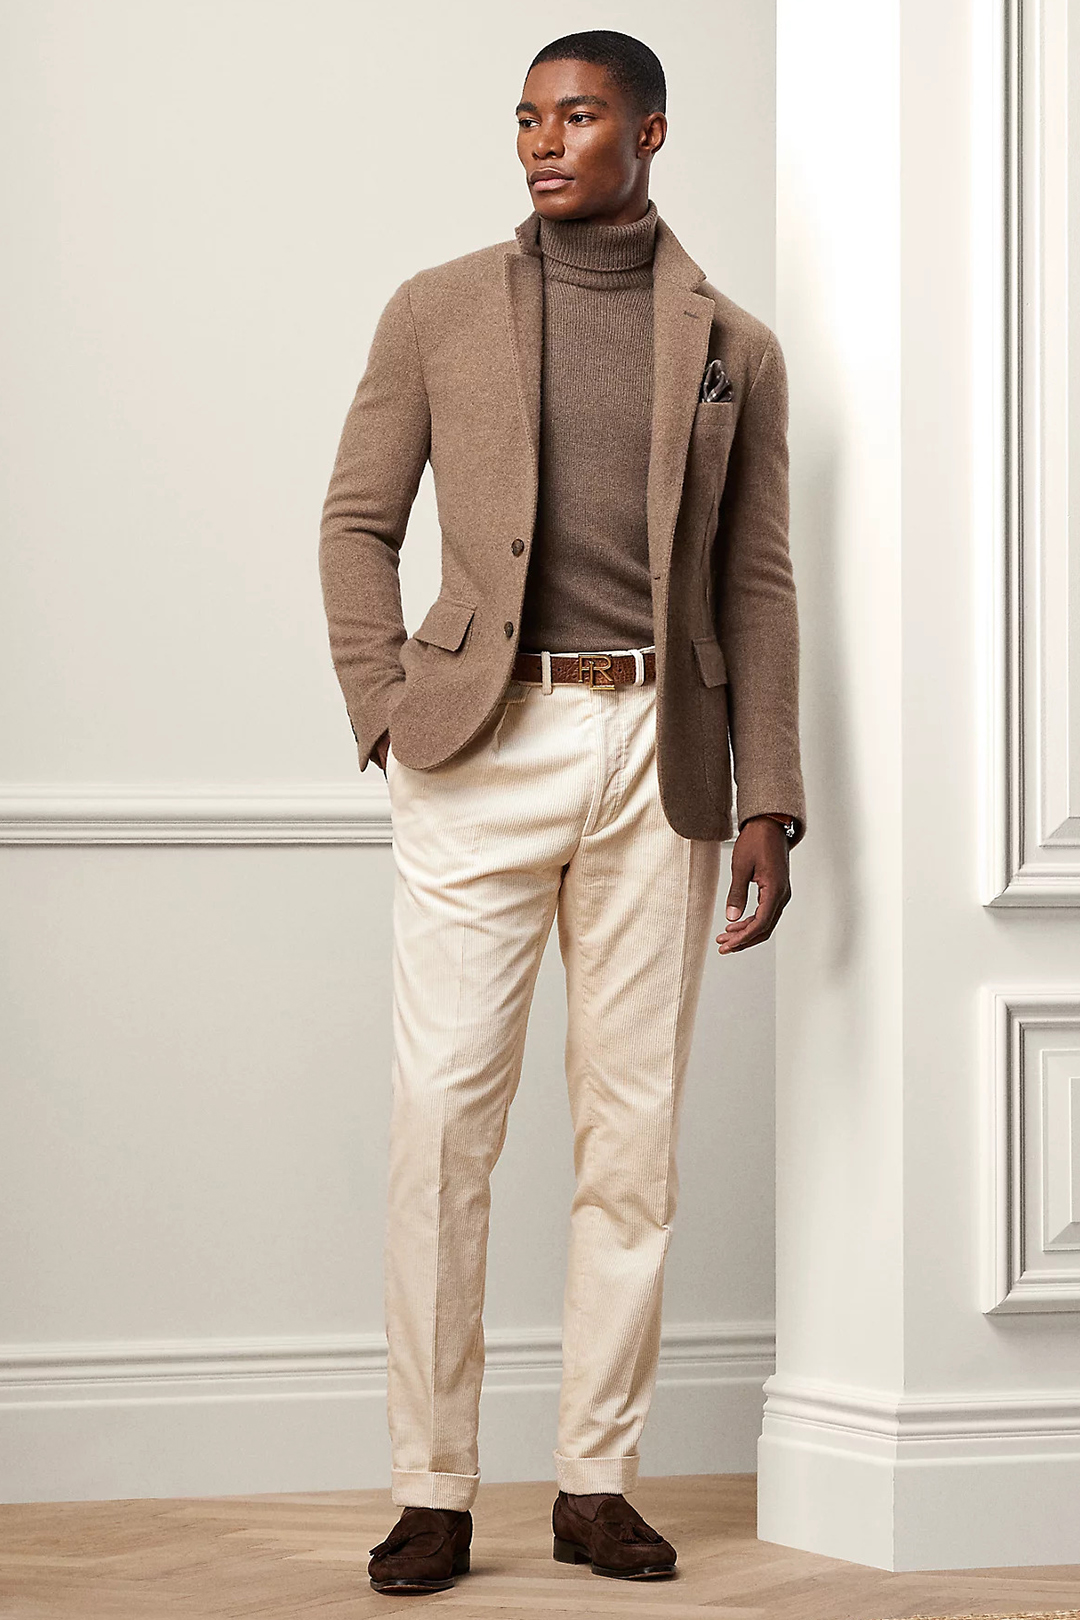 Taupe blazer, brown turtleneck, beige trousers, and brown suede loafers outfit